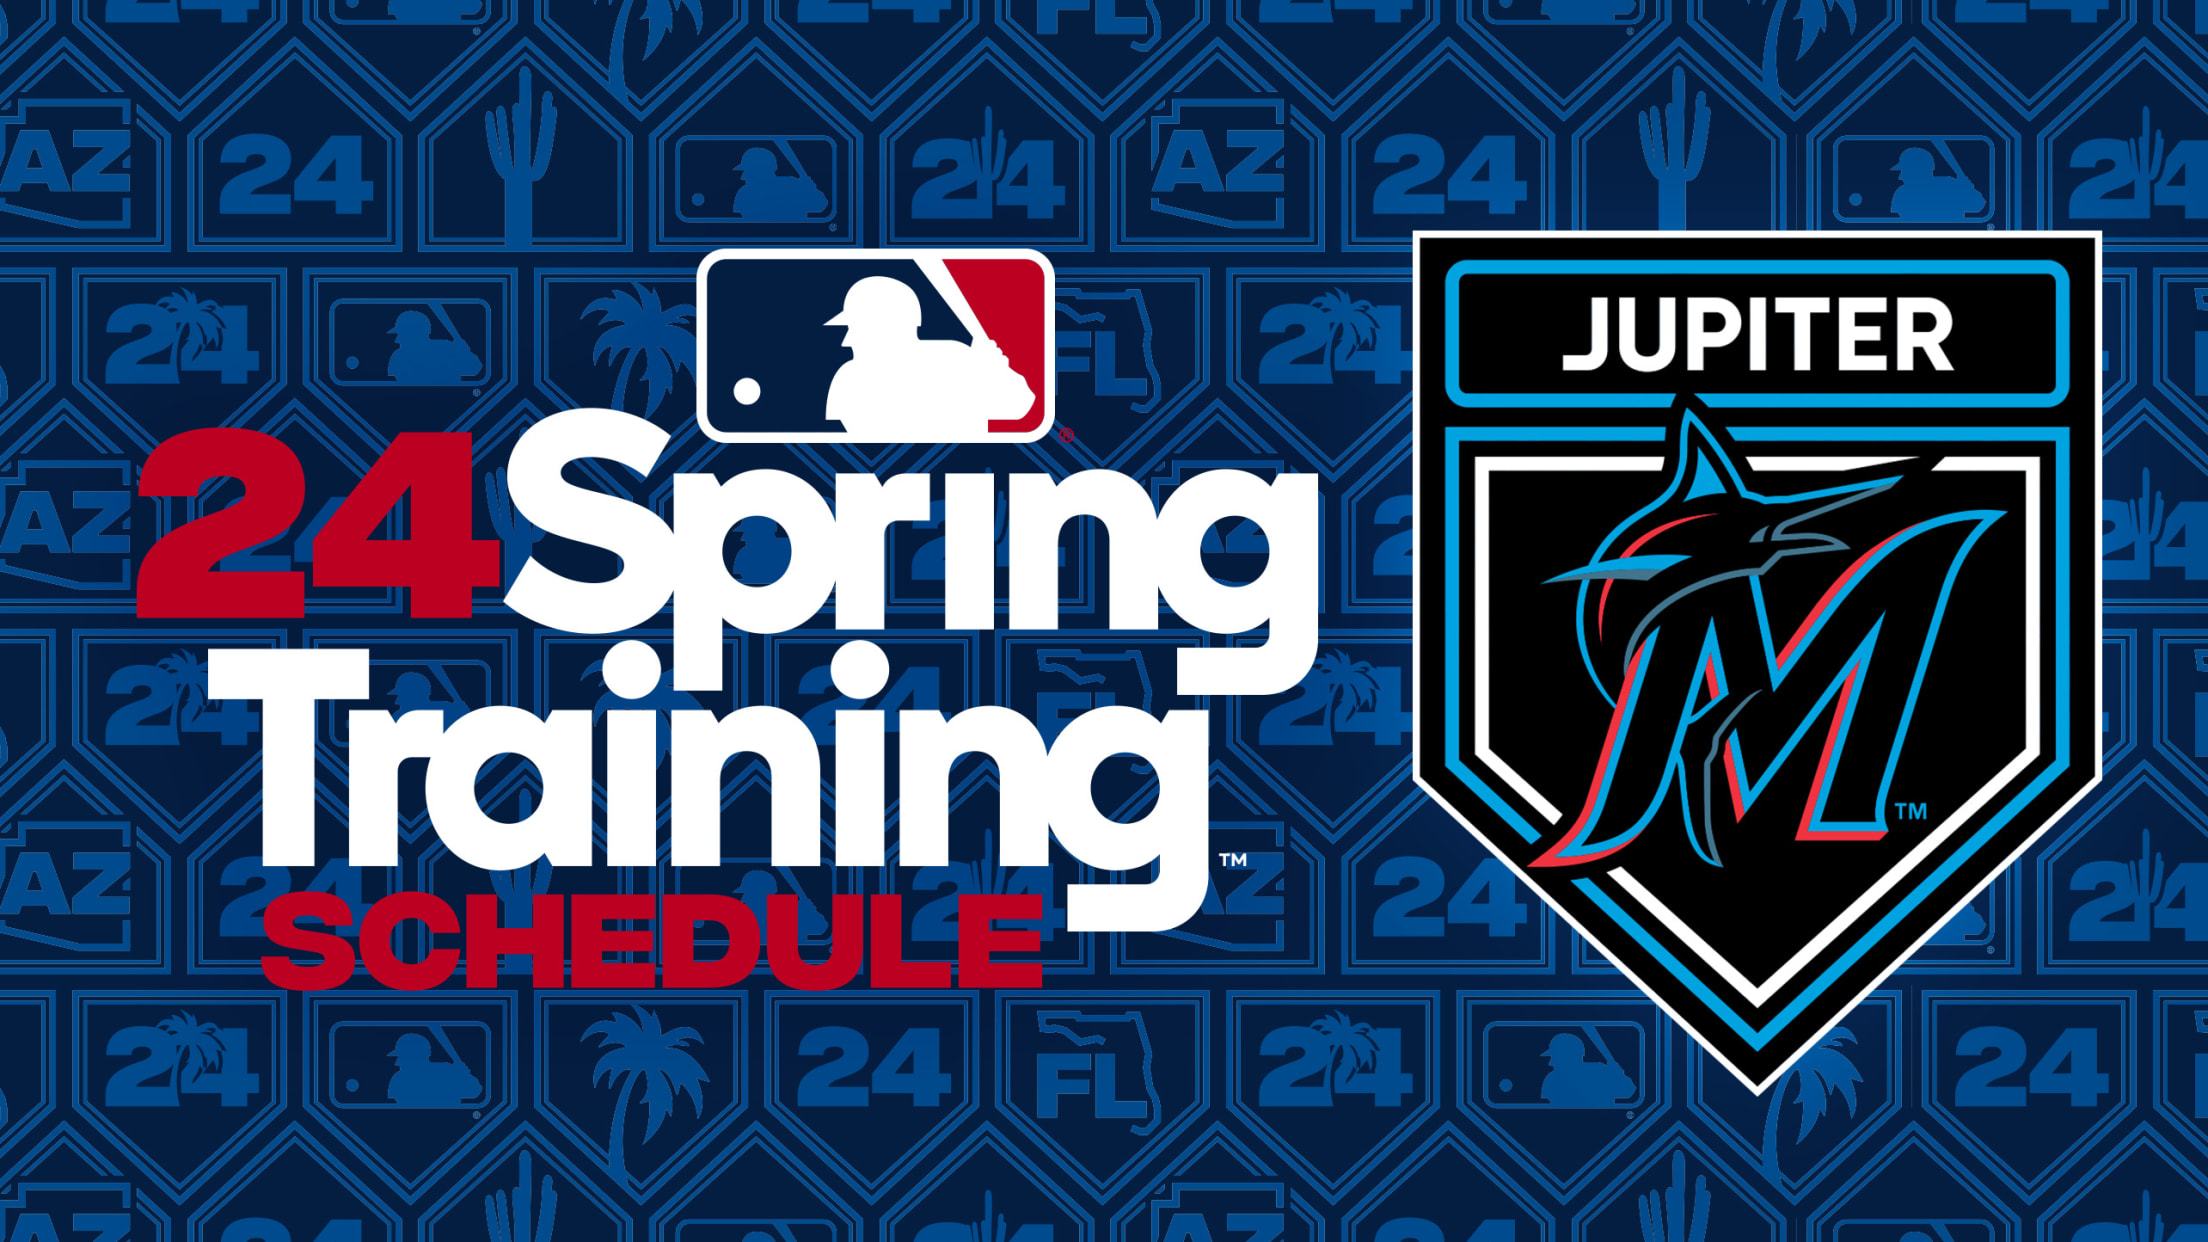 Marlins Spring Training Schedule 2024 domino's pizza carte